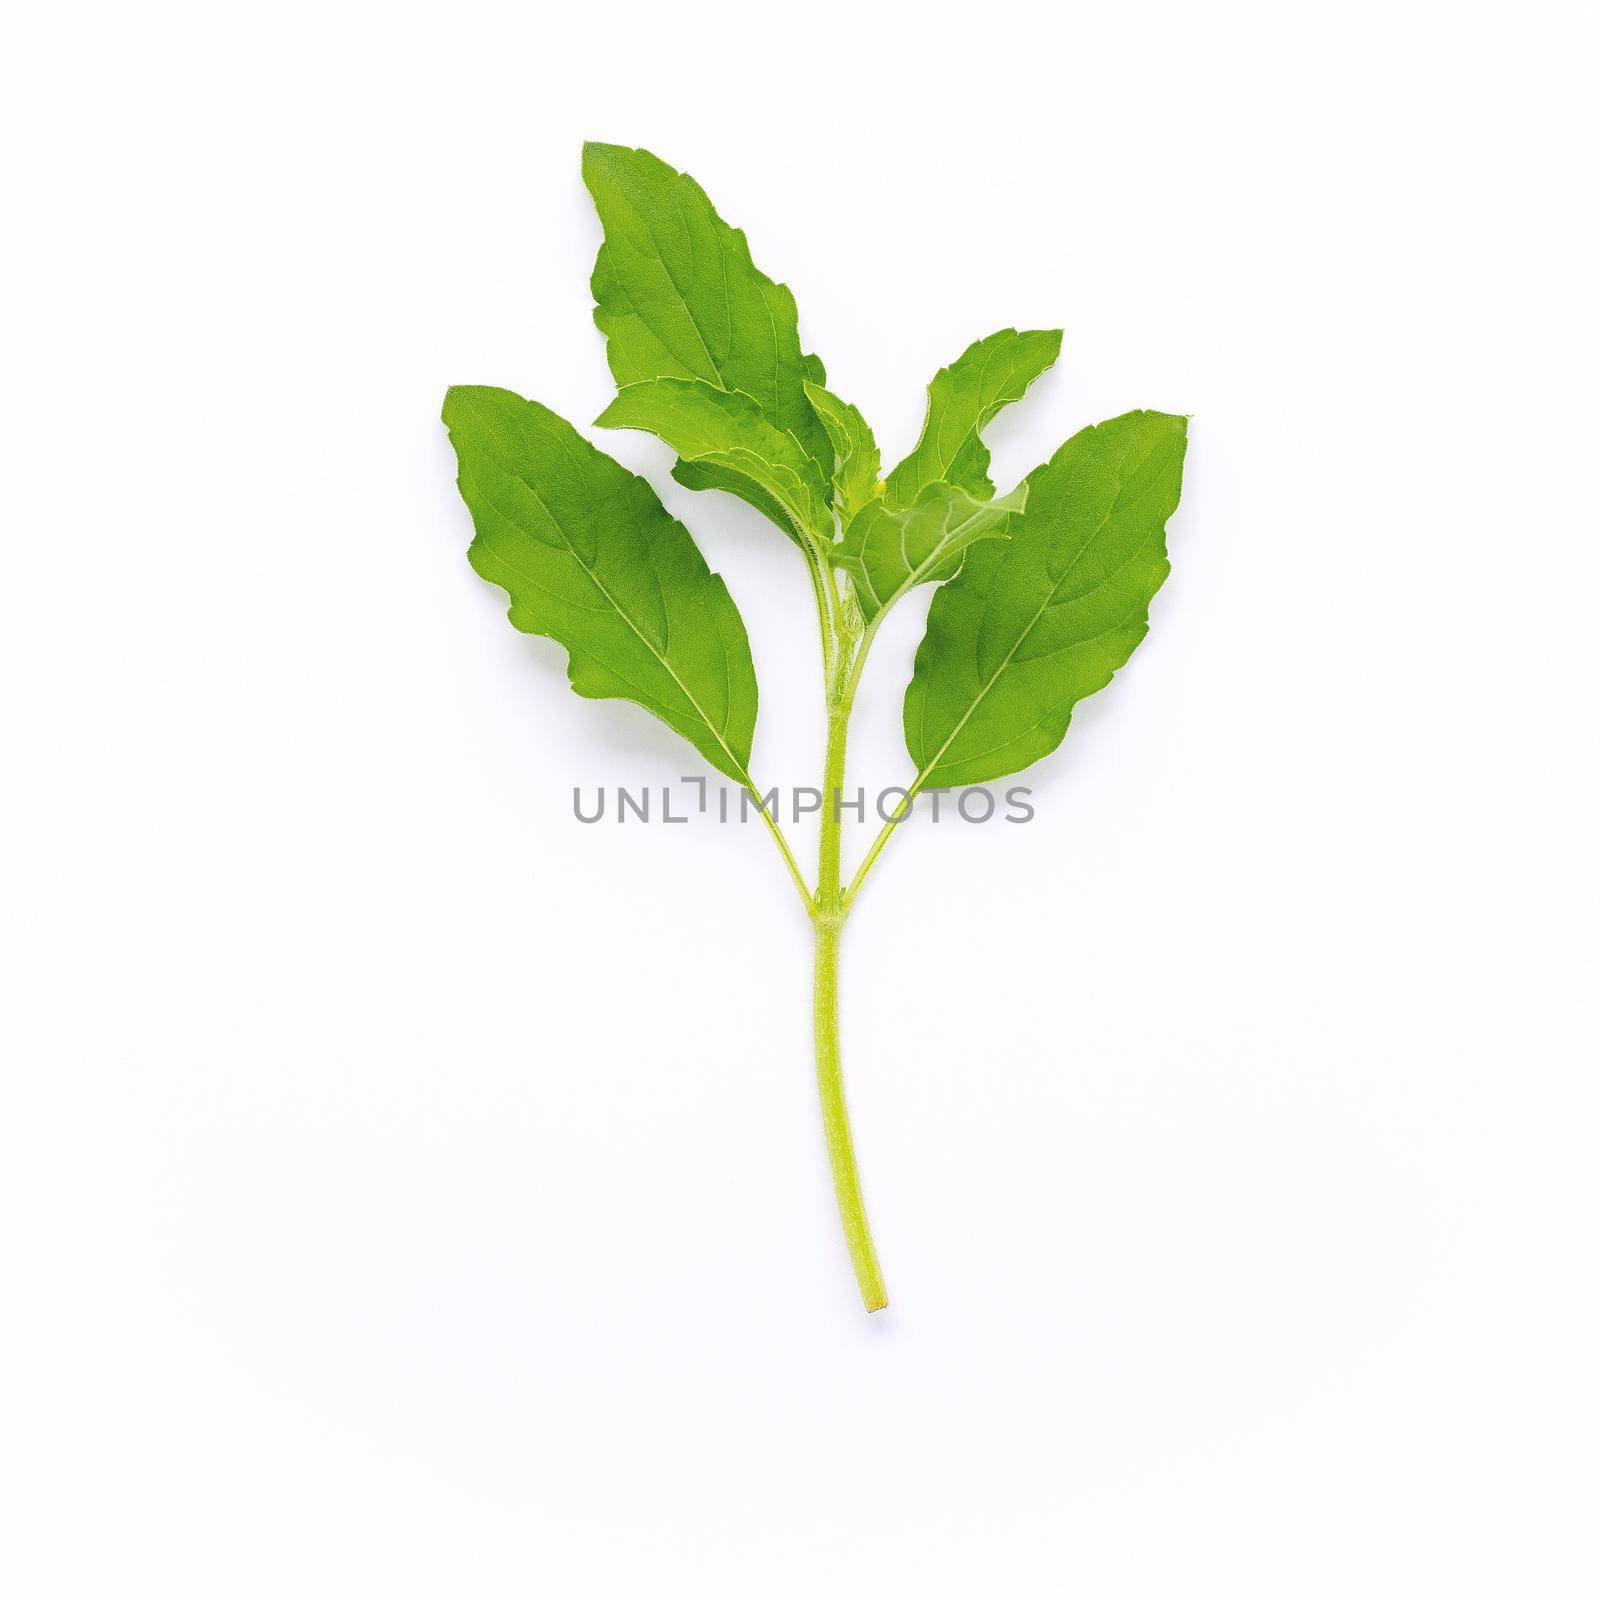 Blanch of fresh holy basil leaves isolate on white background . by kerdkanno